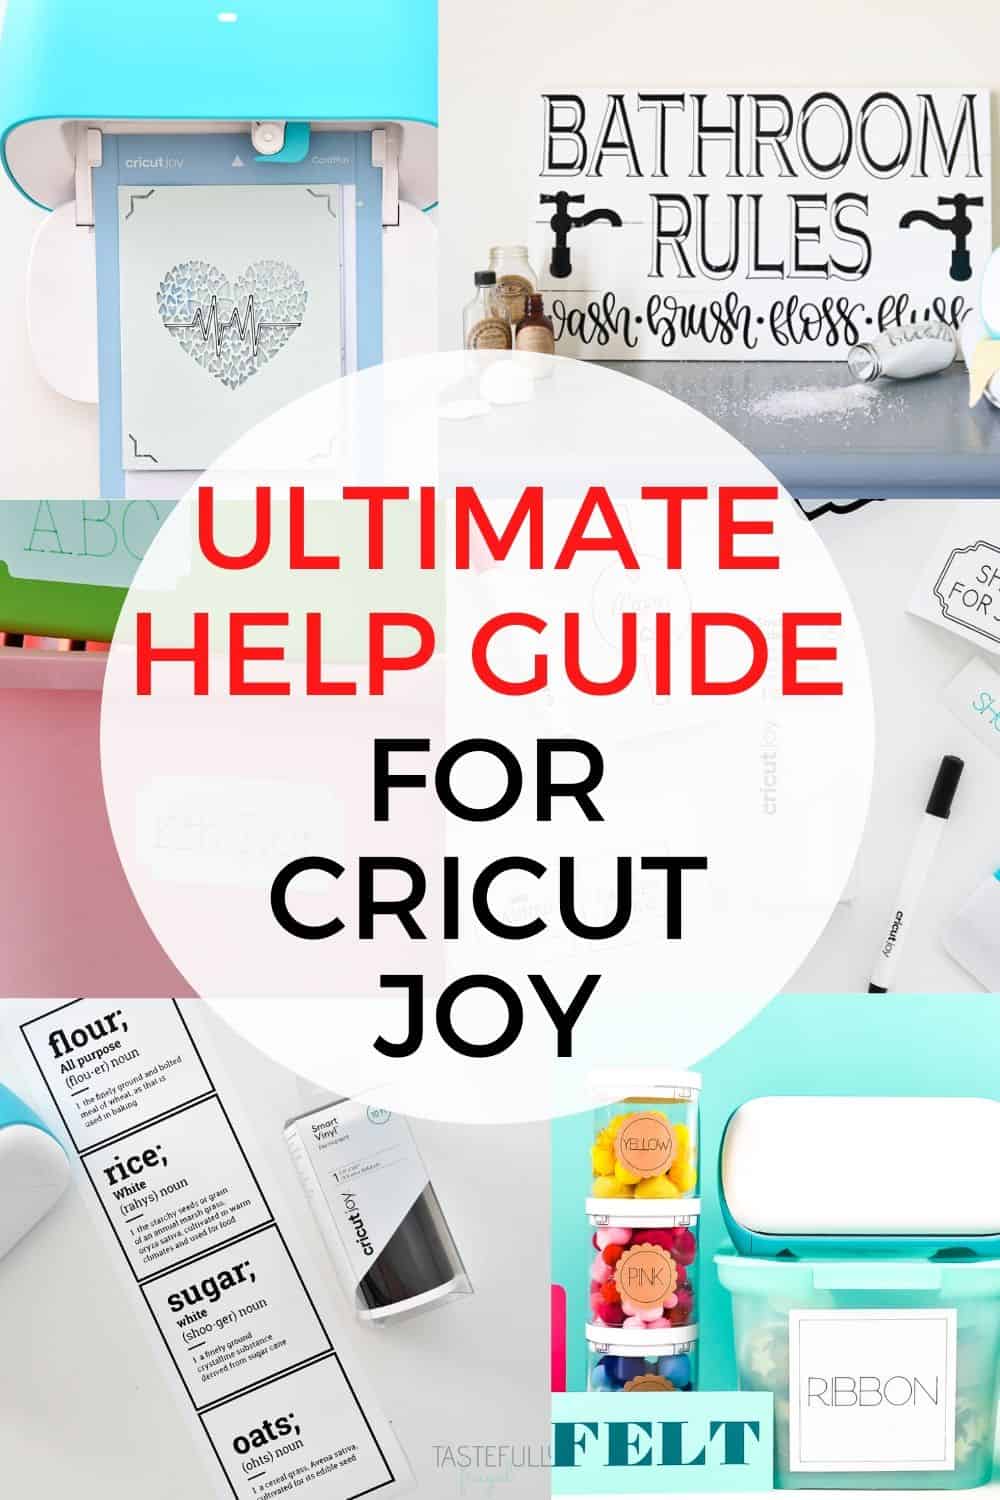 Learn how to use your Cricut Joy with this help guide including tips, tricks and project ideas!